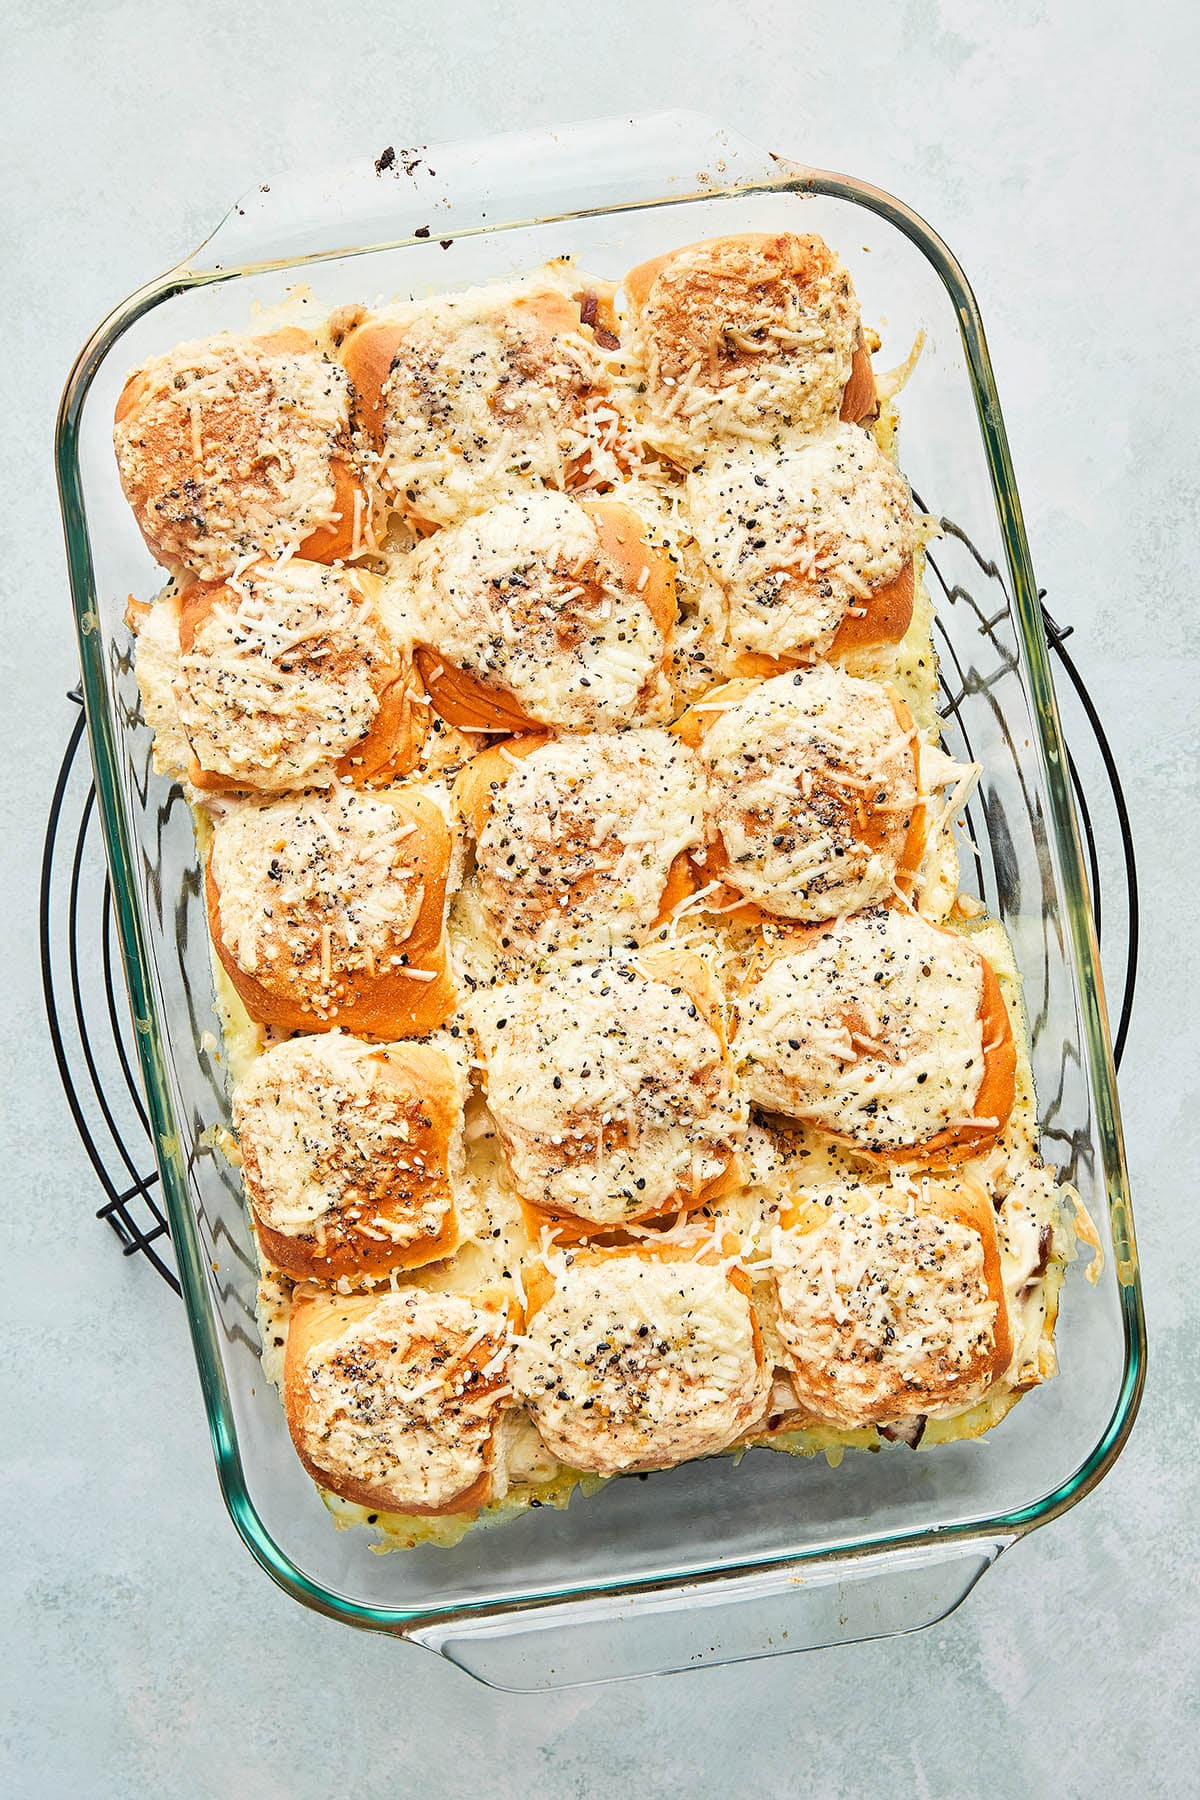 A rectangle baking dish of sweet Hawaiian roll sandwiches on a wire rack.